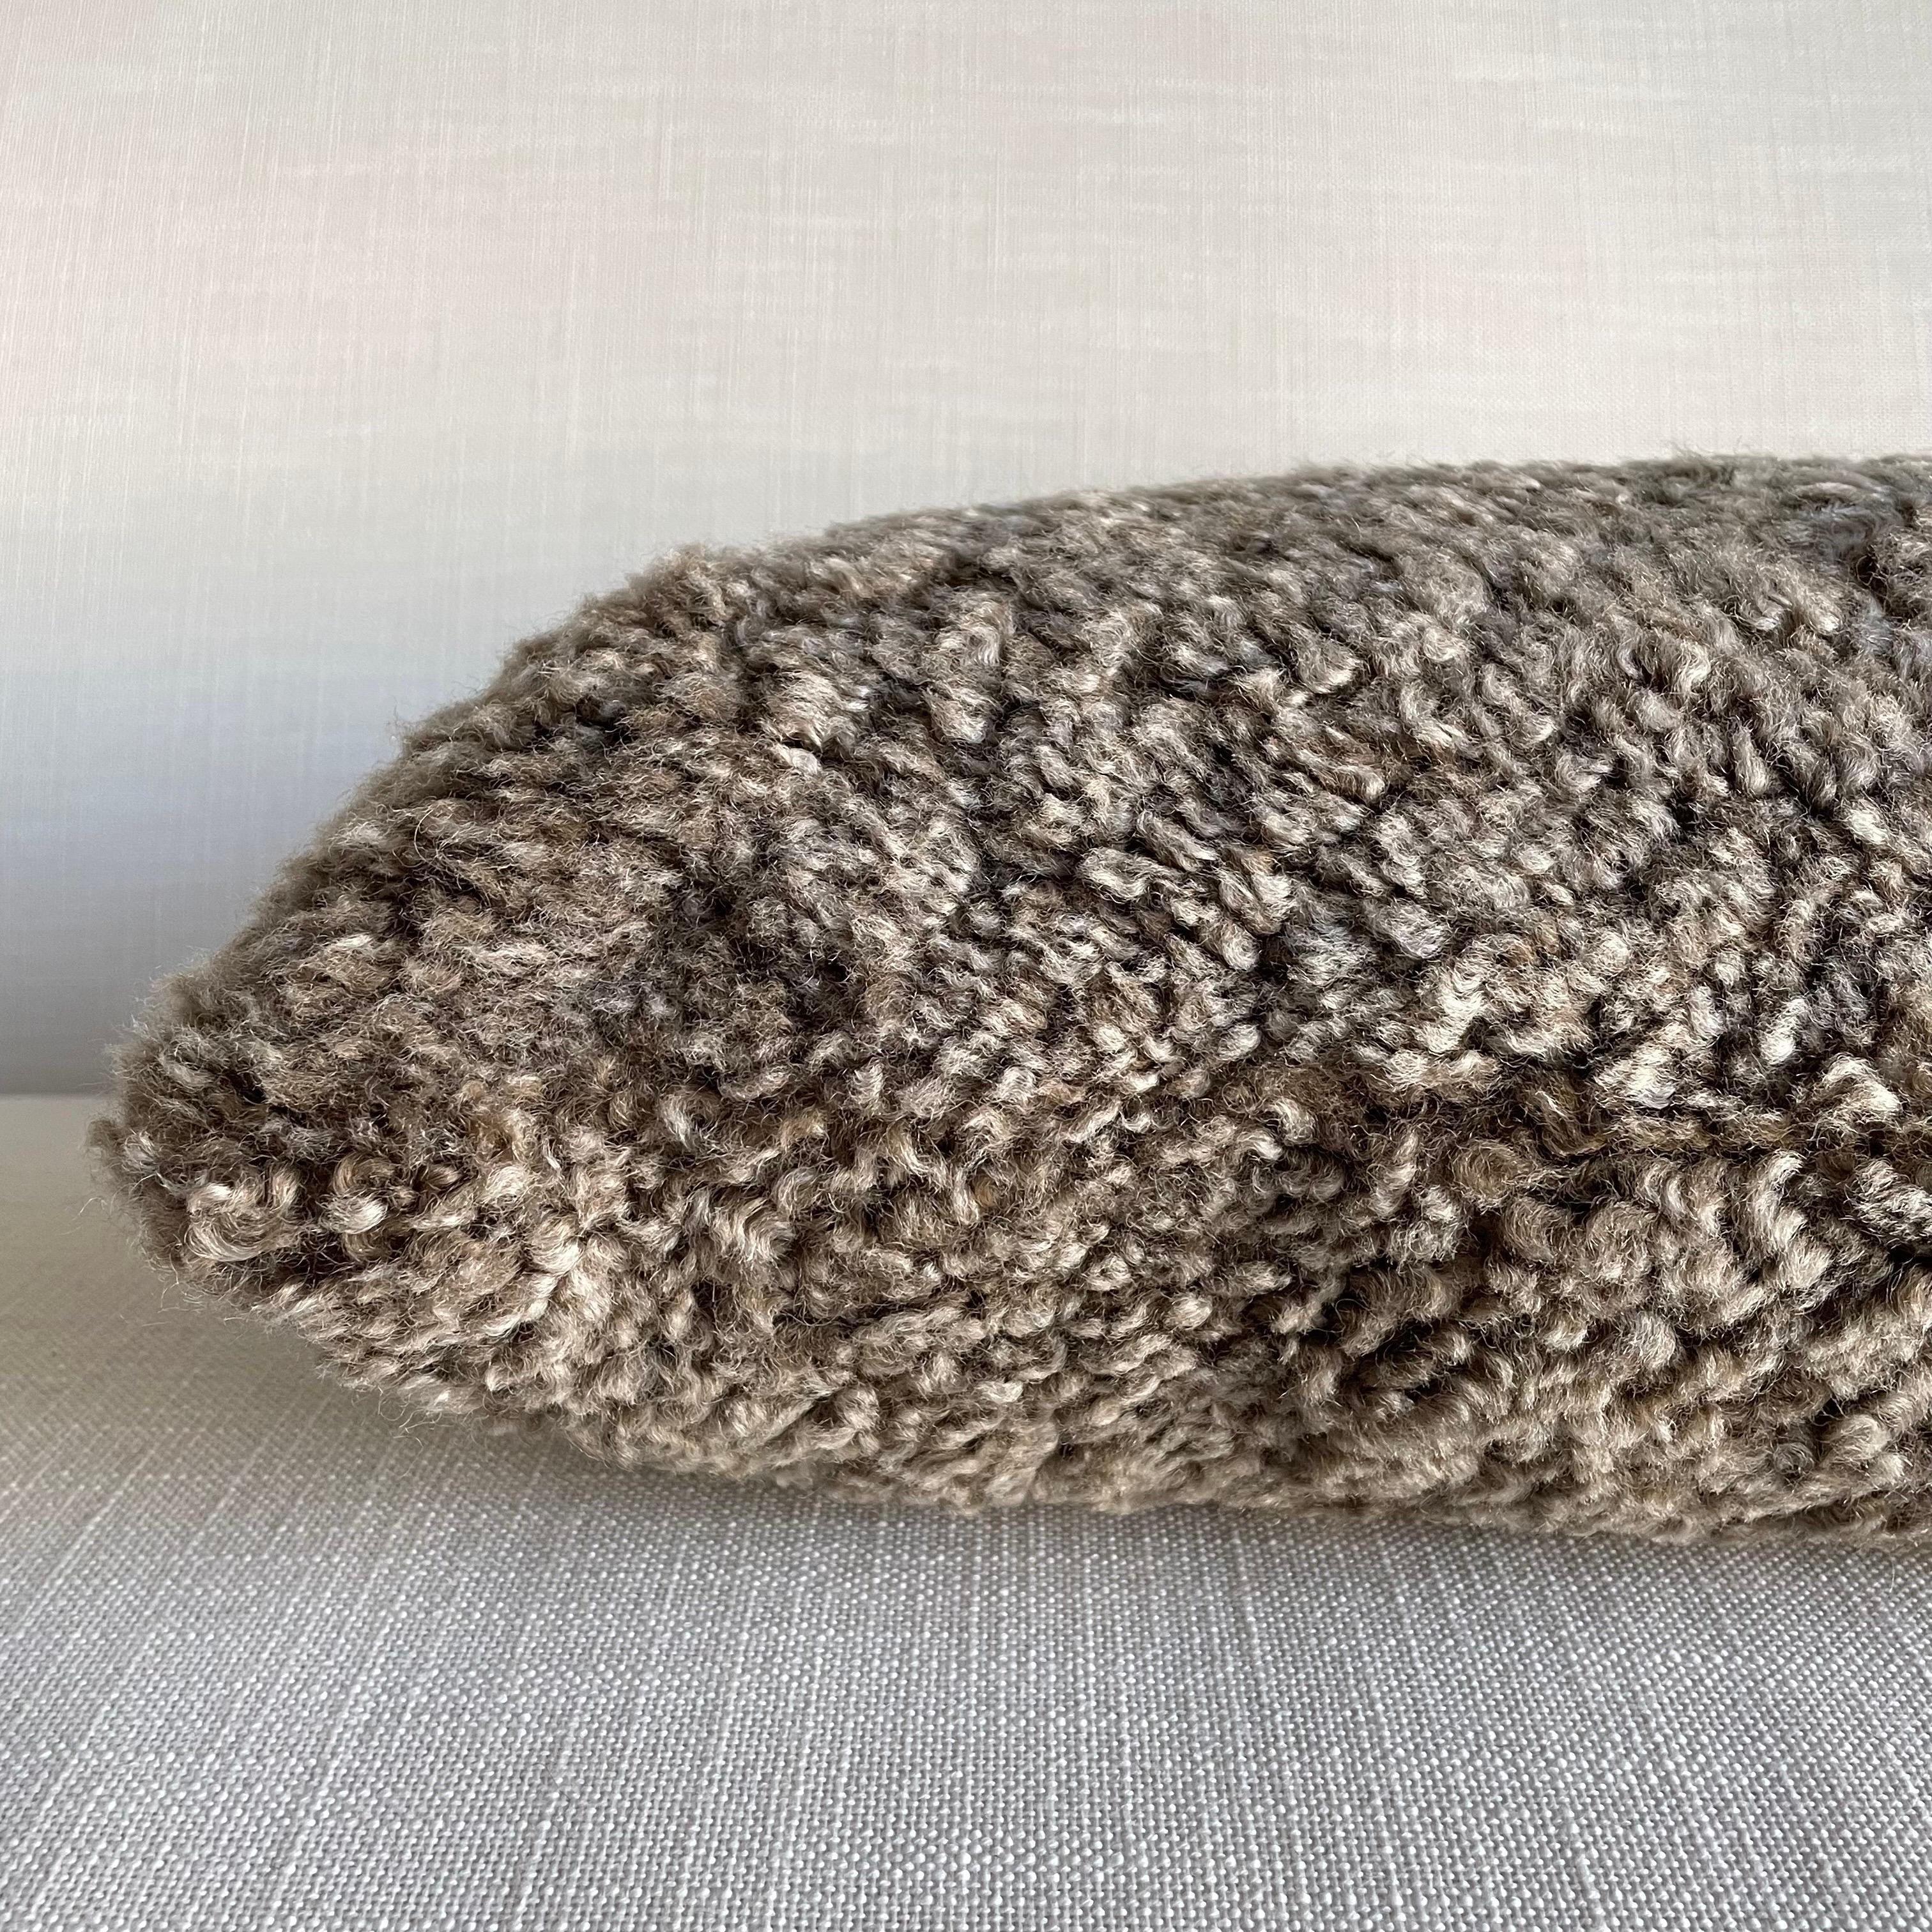 Custom Curly Shearling Lumbar Pillow in Mink Color For Sale 6